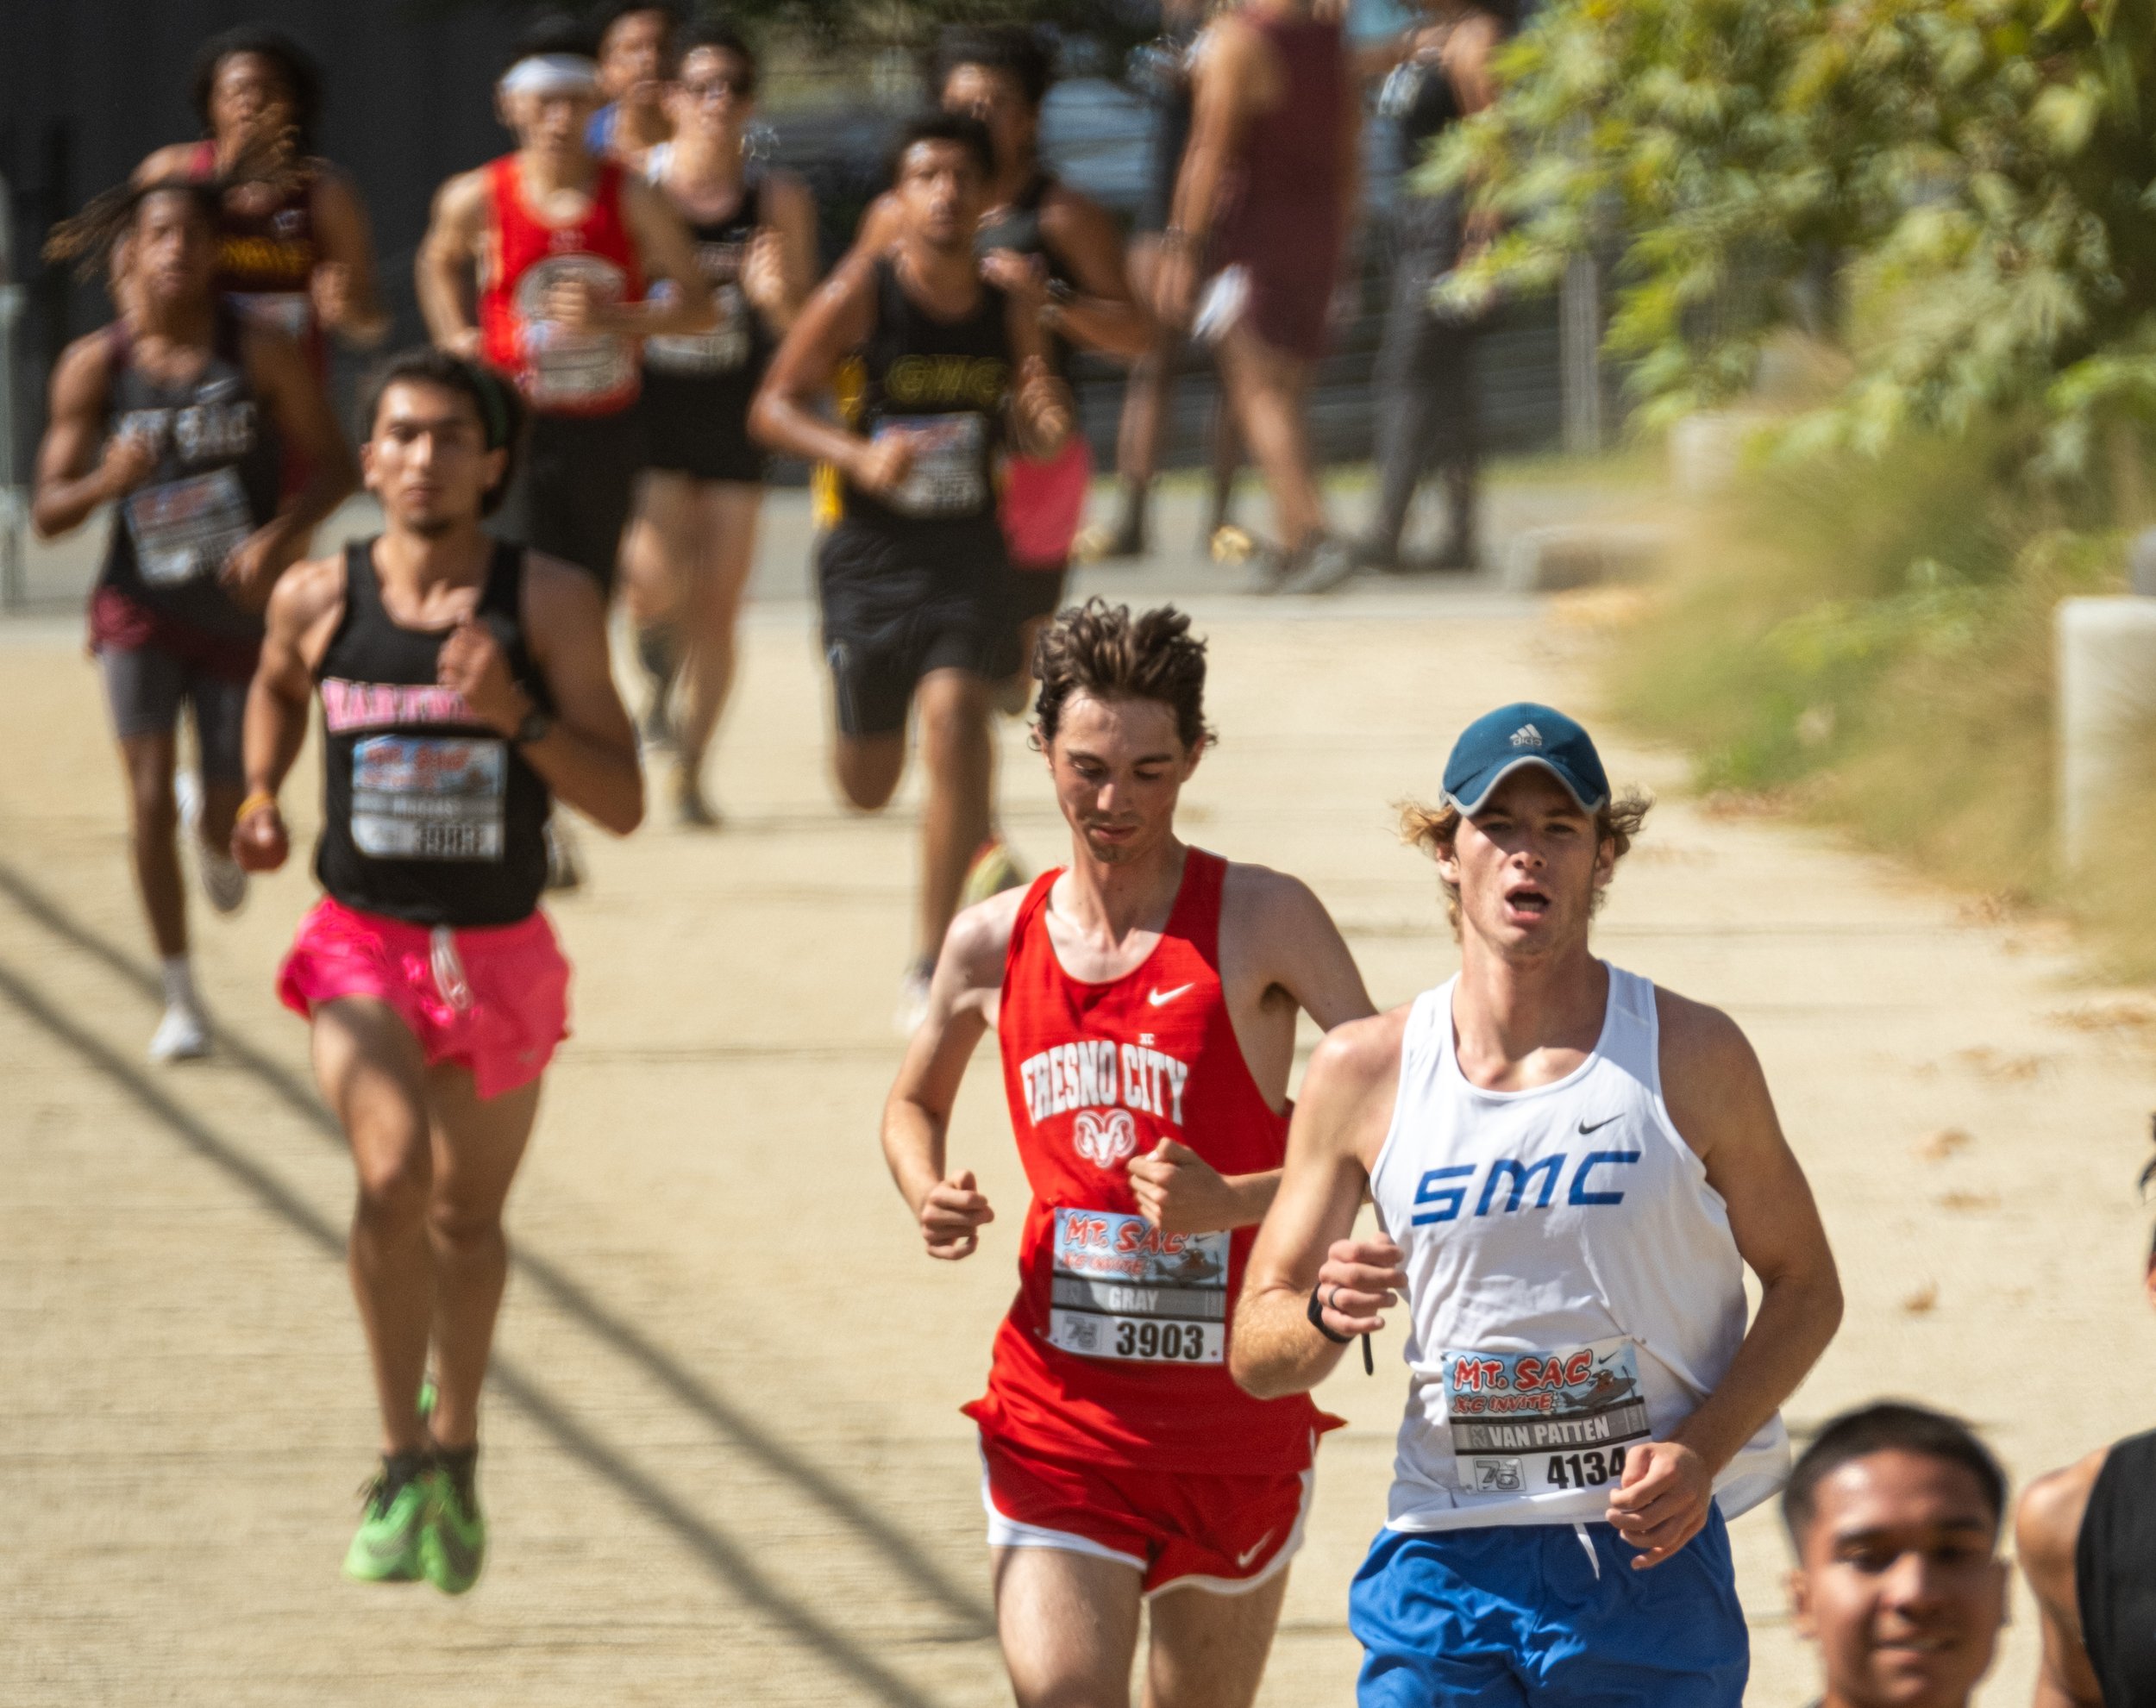  Jesse Van Patten(4134,SMC) running alongside others before reaching the finish line at the MT. SAC Cross Country Invitational on Friday, Oct 13 at MT. SAC in Walnut, Calif. (Danilo Perez | The Corsair) 